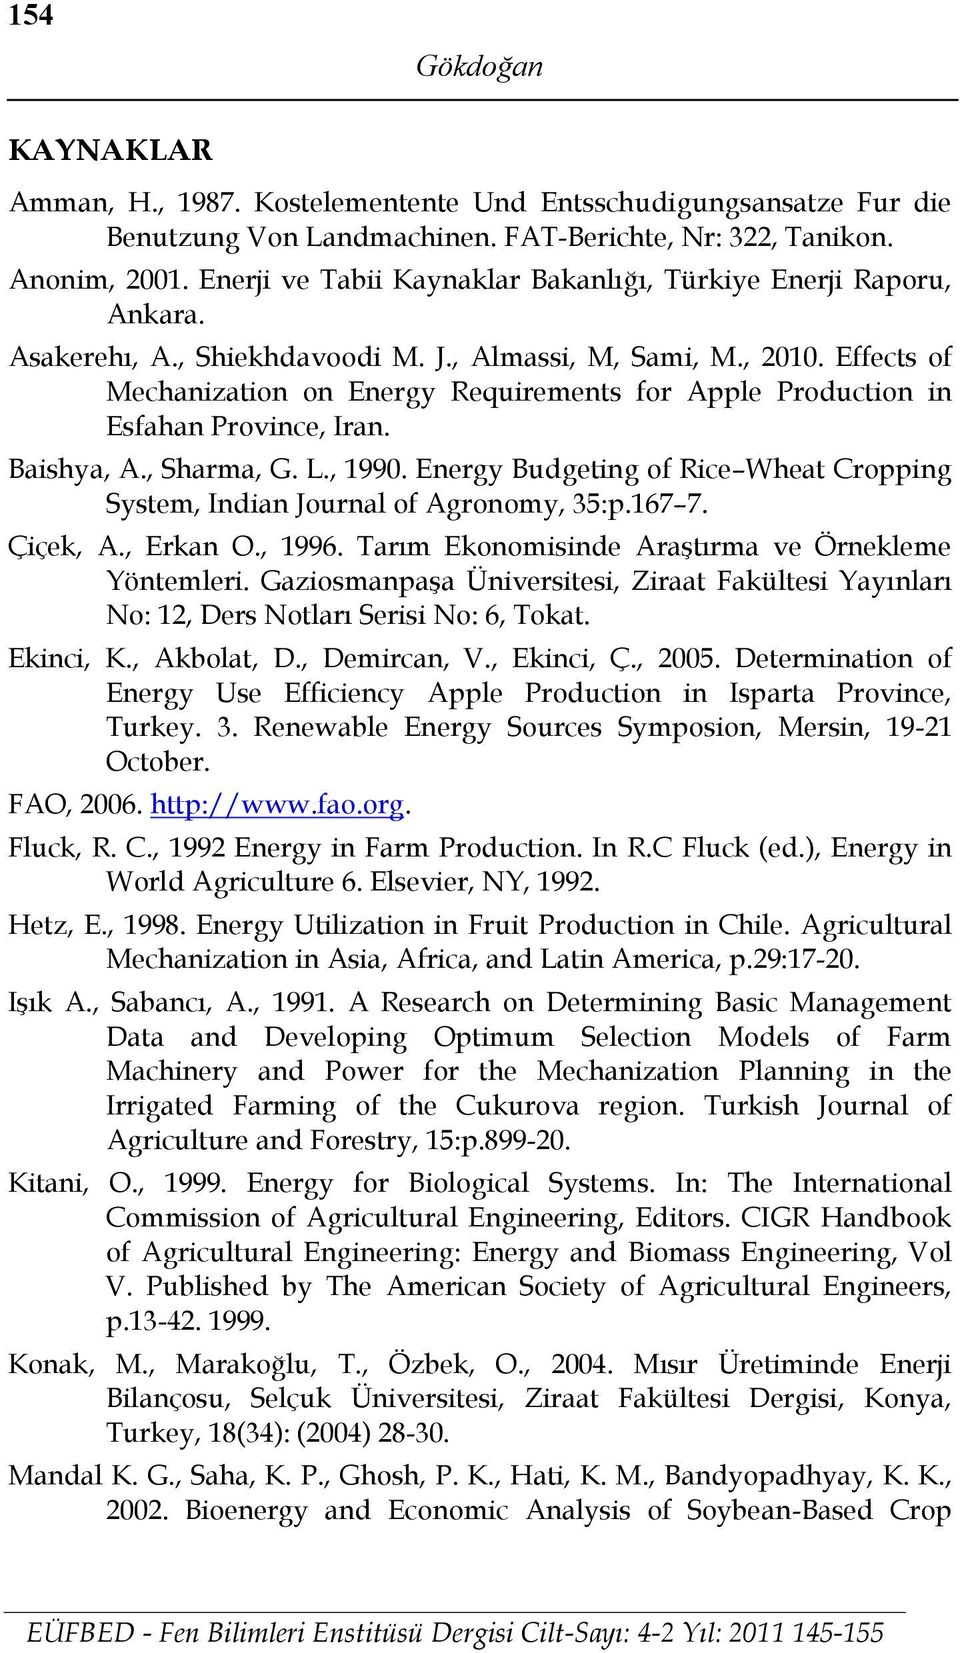 Effects of Mechanization on Energy Requirements for Apple Production in Esfahan Province, Iran. Baishya, A., Sharma, G. L., 1990.